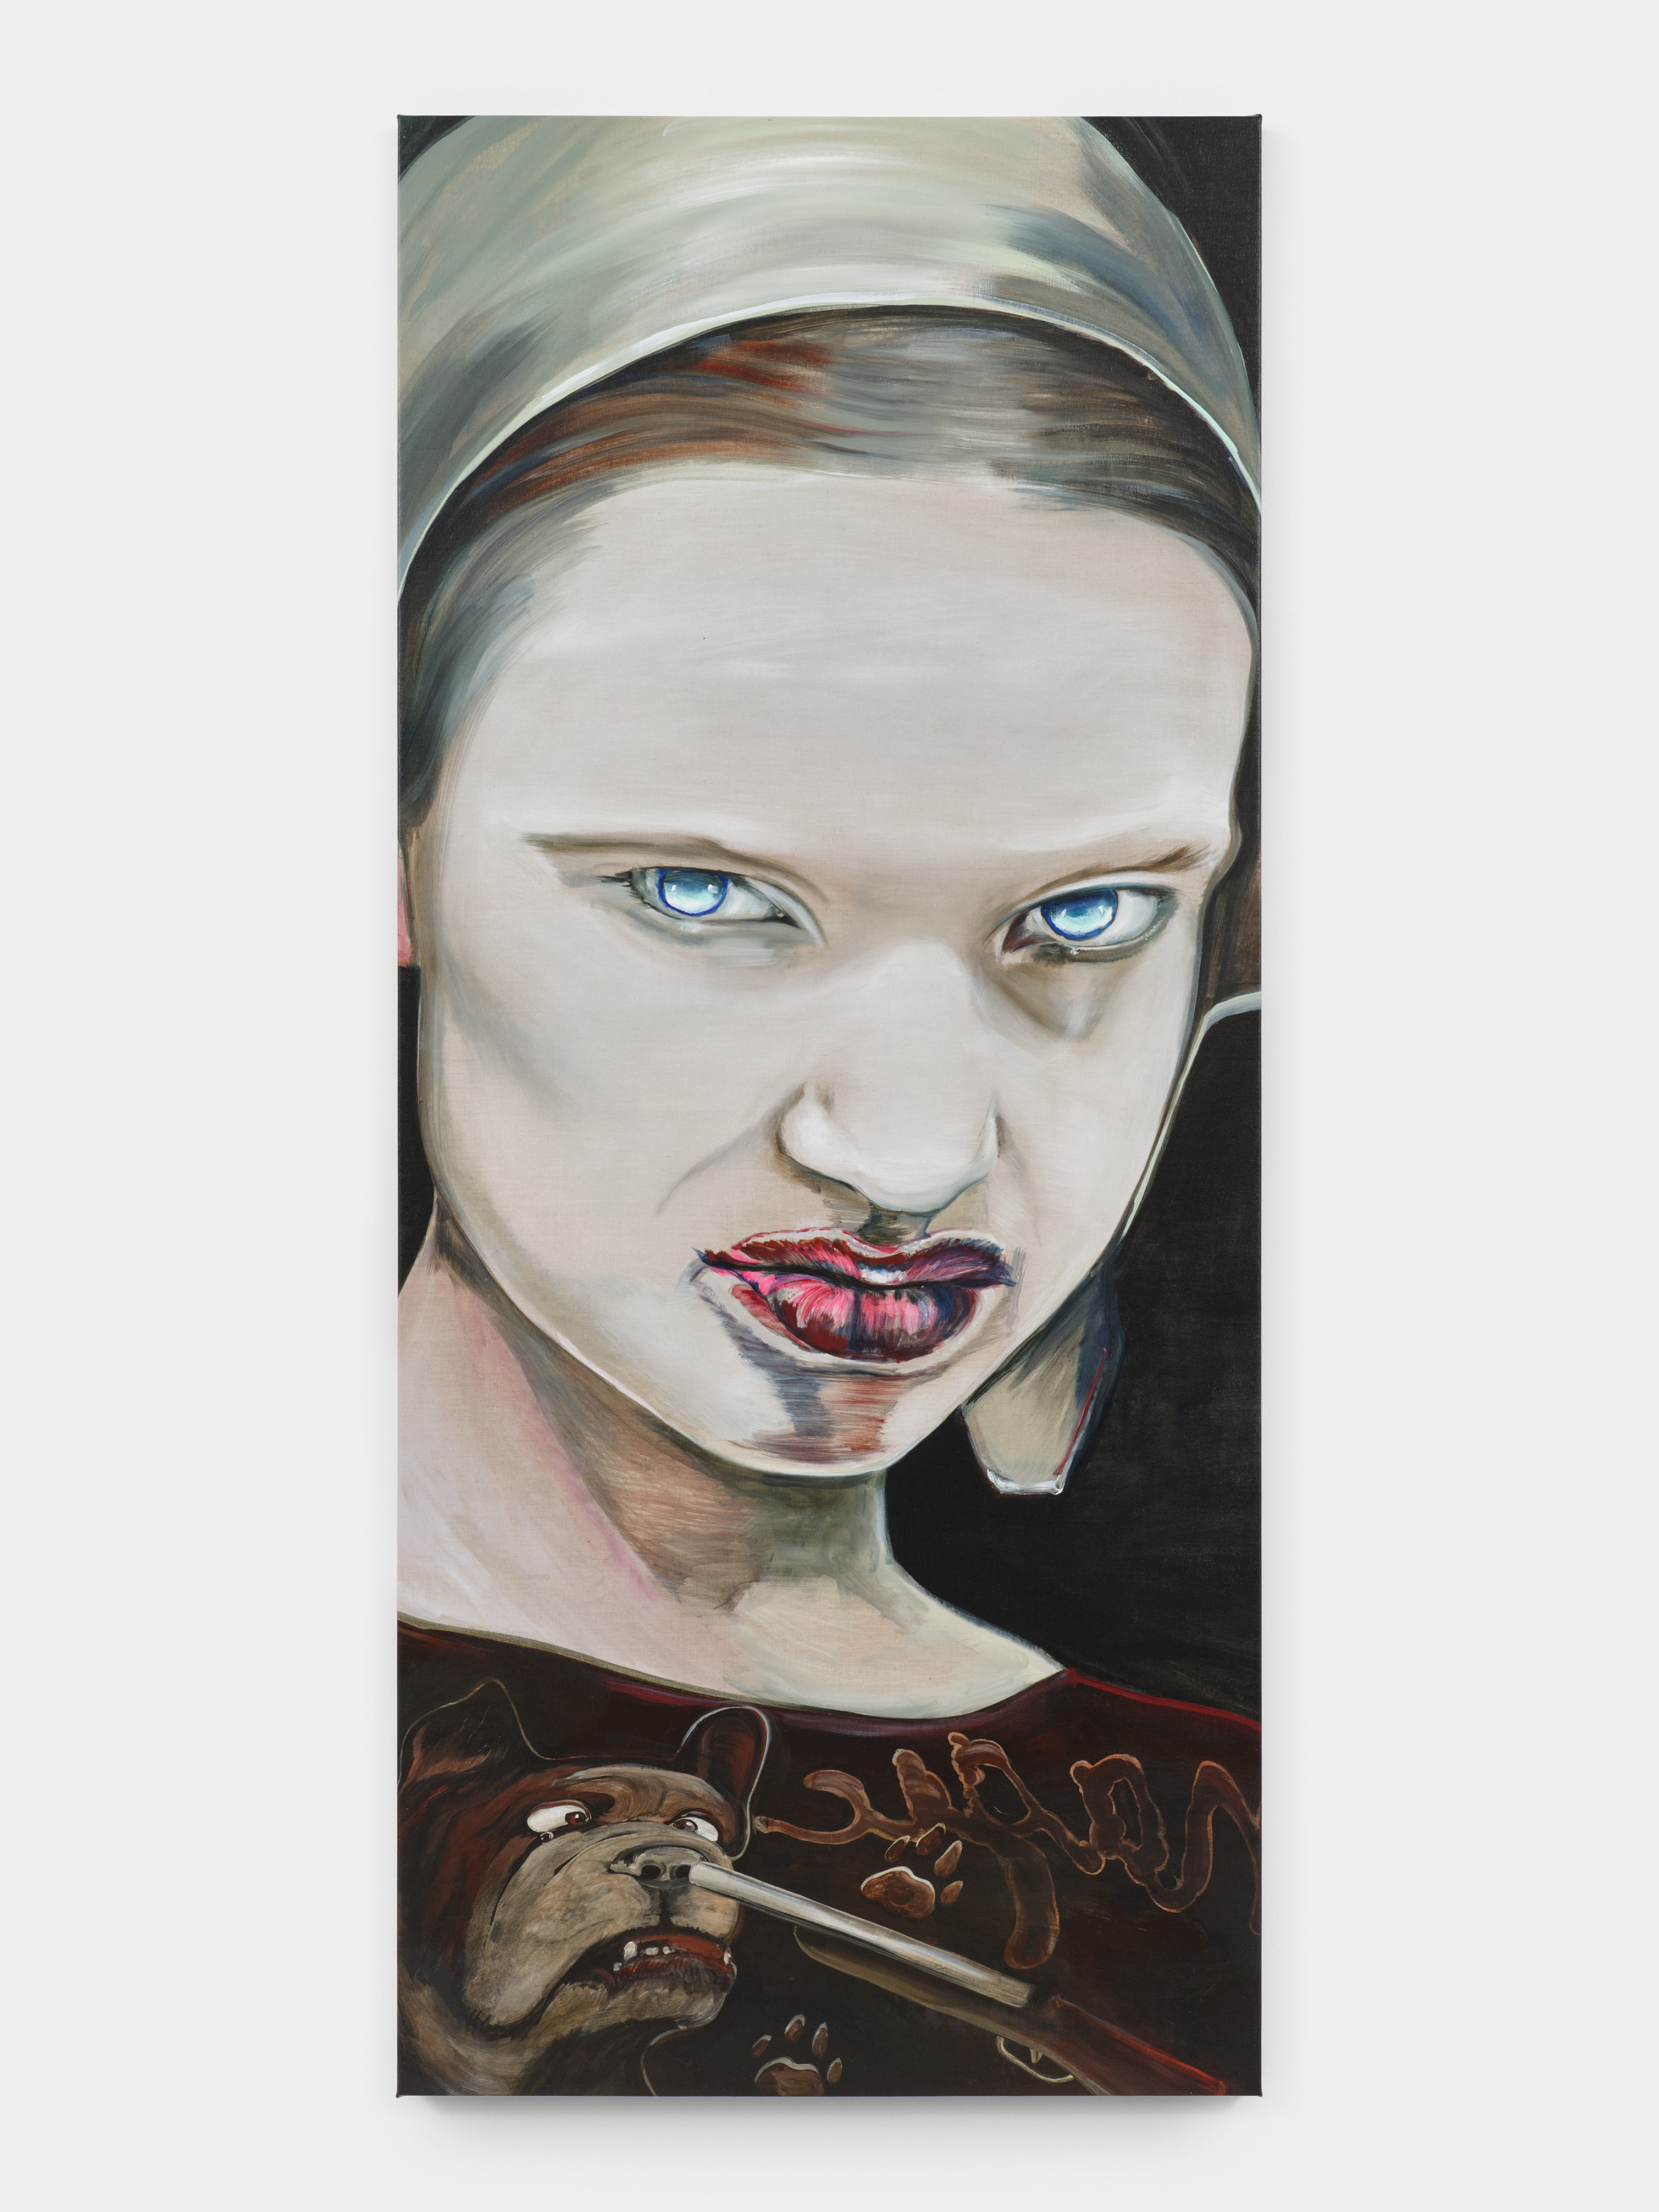  A painting of a woman with blue eyes and red lips wearing a bonnet with her eyes fixed on the viewer and dog with a shot gun pointed at his face on her shirt.